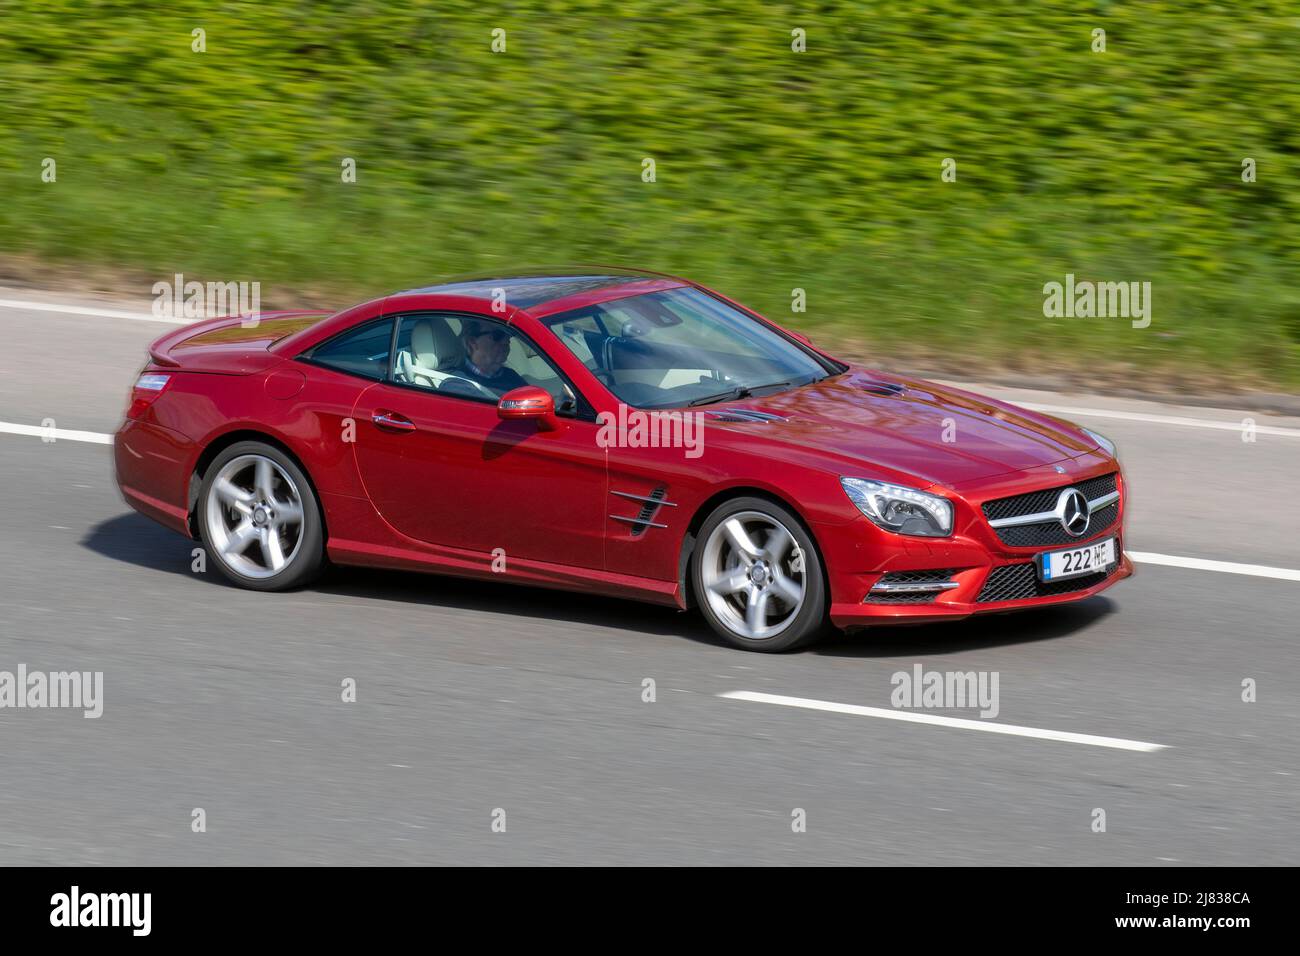 2015 red Mercedes Benz SL400 Amg Sport 7G-Tronic Auto 2996cc petrol coupe; driving on the M6 motorway, UK Stock Photo